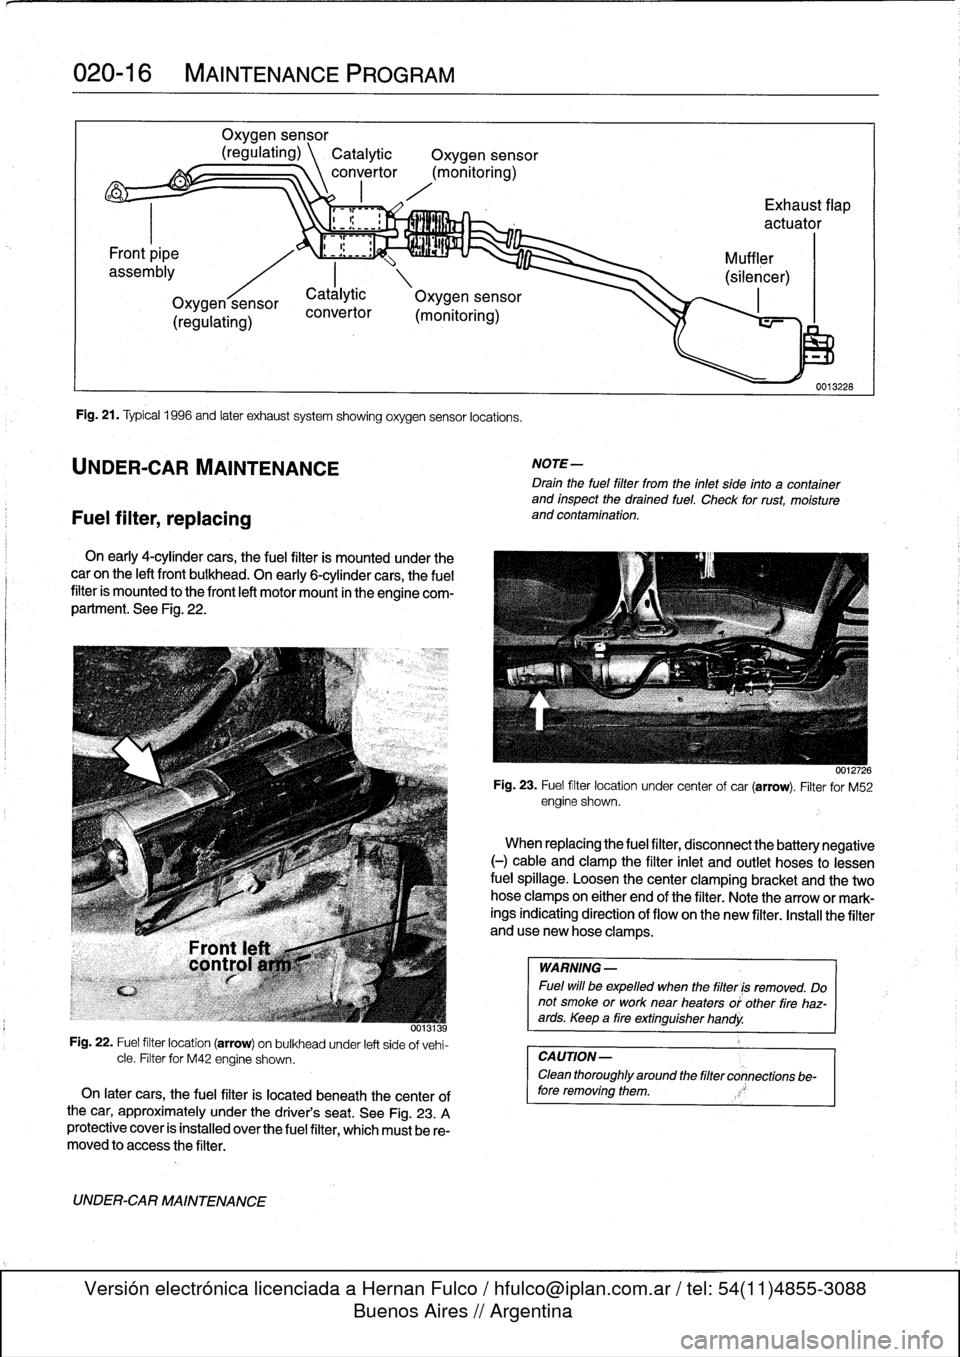 BMW 323i 1995 E36 Workshop Manual 
020-
1
6

	

MAINTENANCE
PROGRAM

Fuel
filter,
replacing

Oxygen
sensor

(regulating)
\
Catalytic

	

Oxygen
sensor
convertor
(monitoring)

Fig
.
21
.
Typical
1996
and
later
exhaust
system
showing
ox